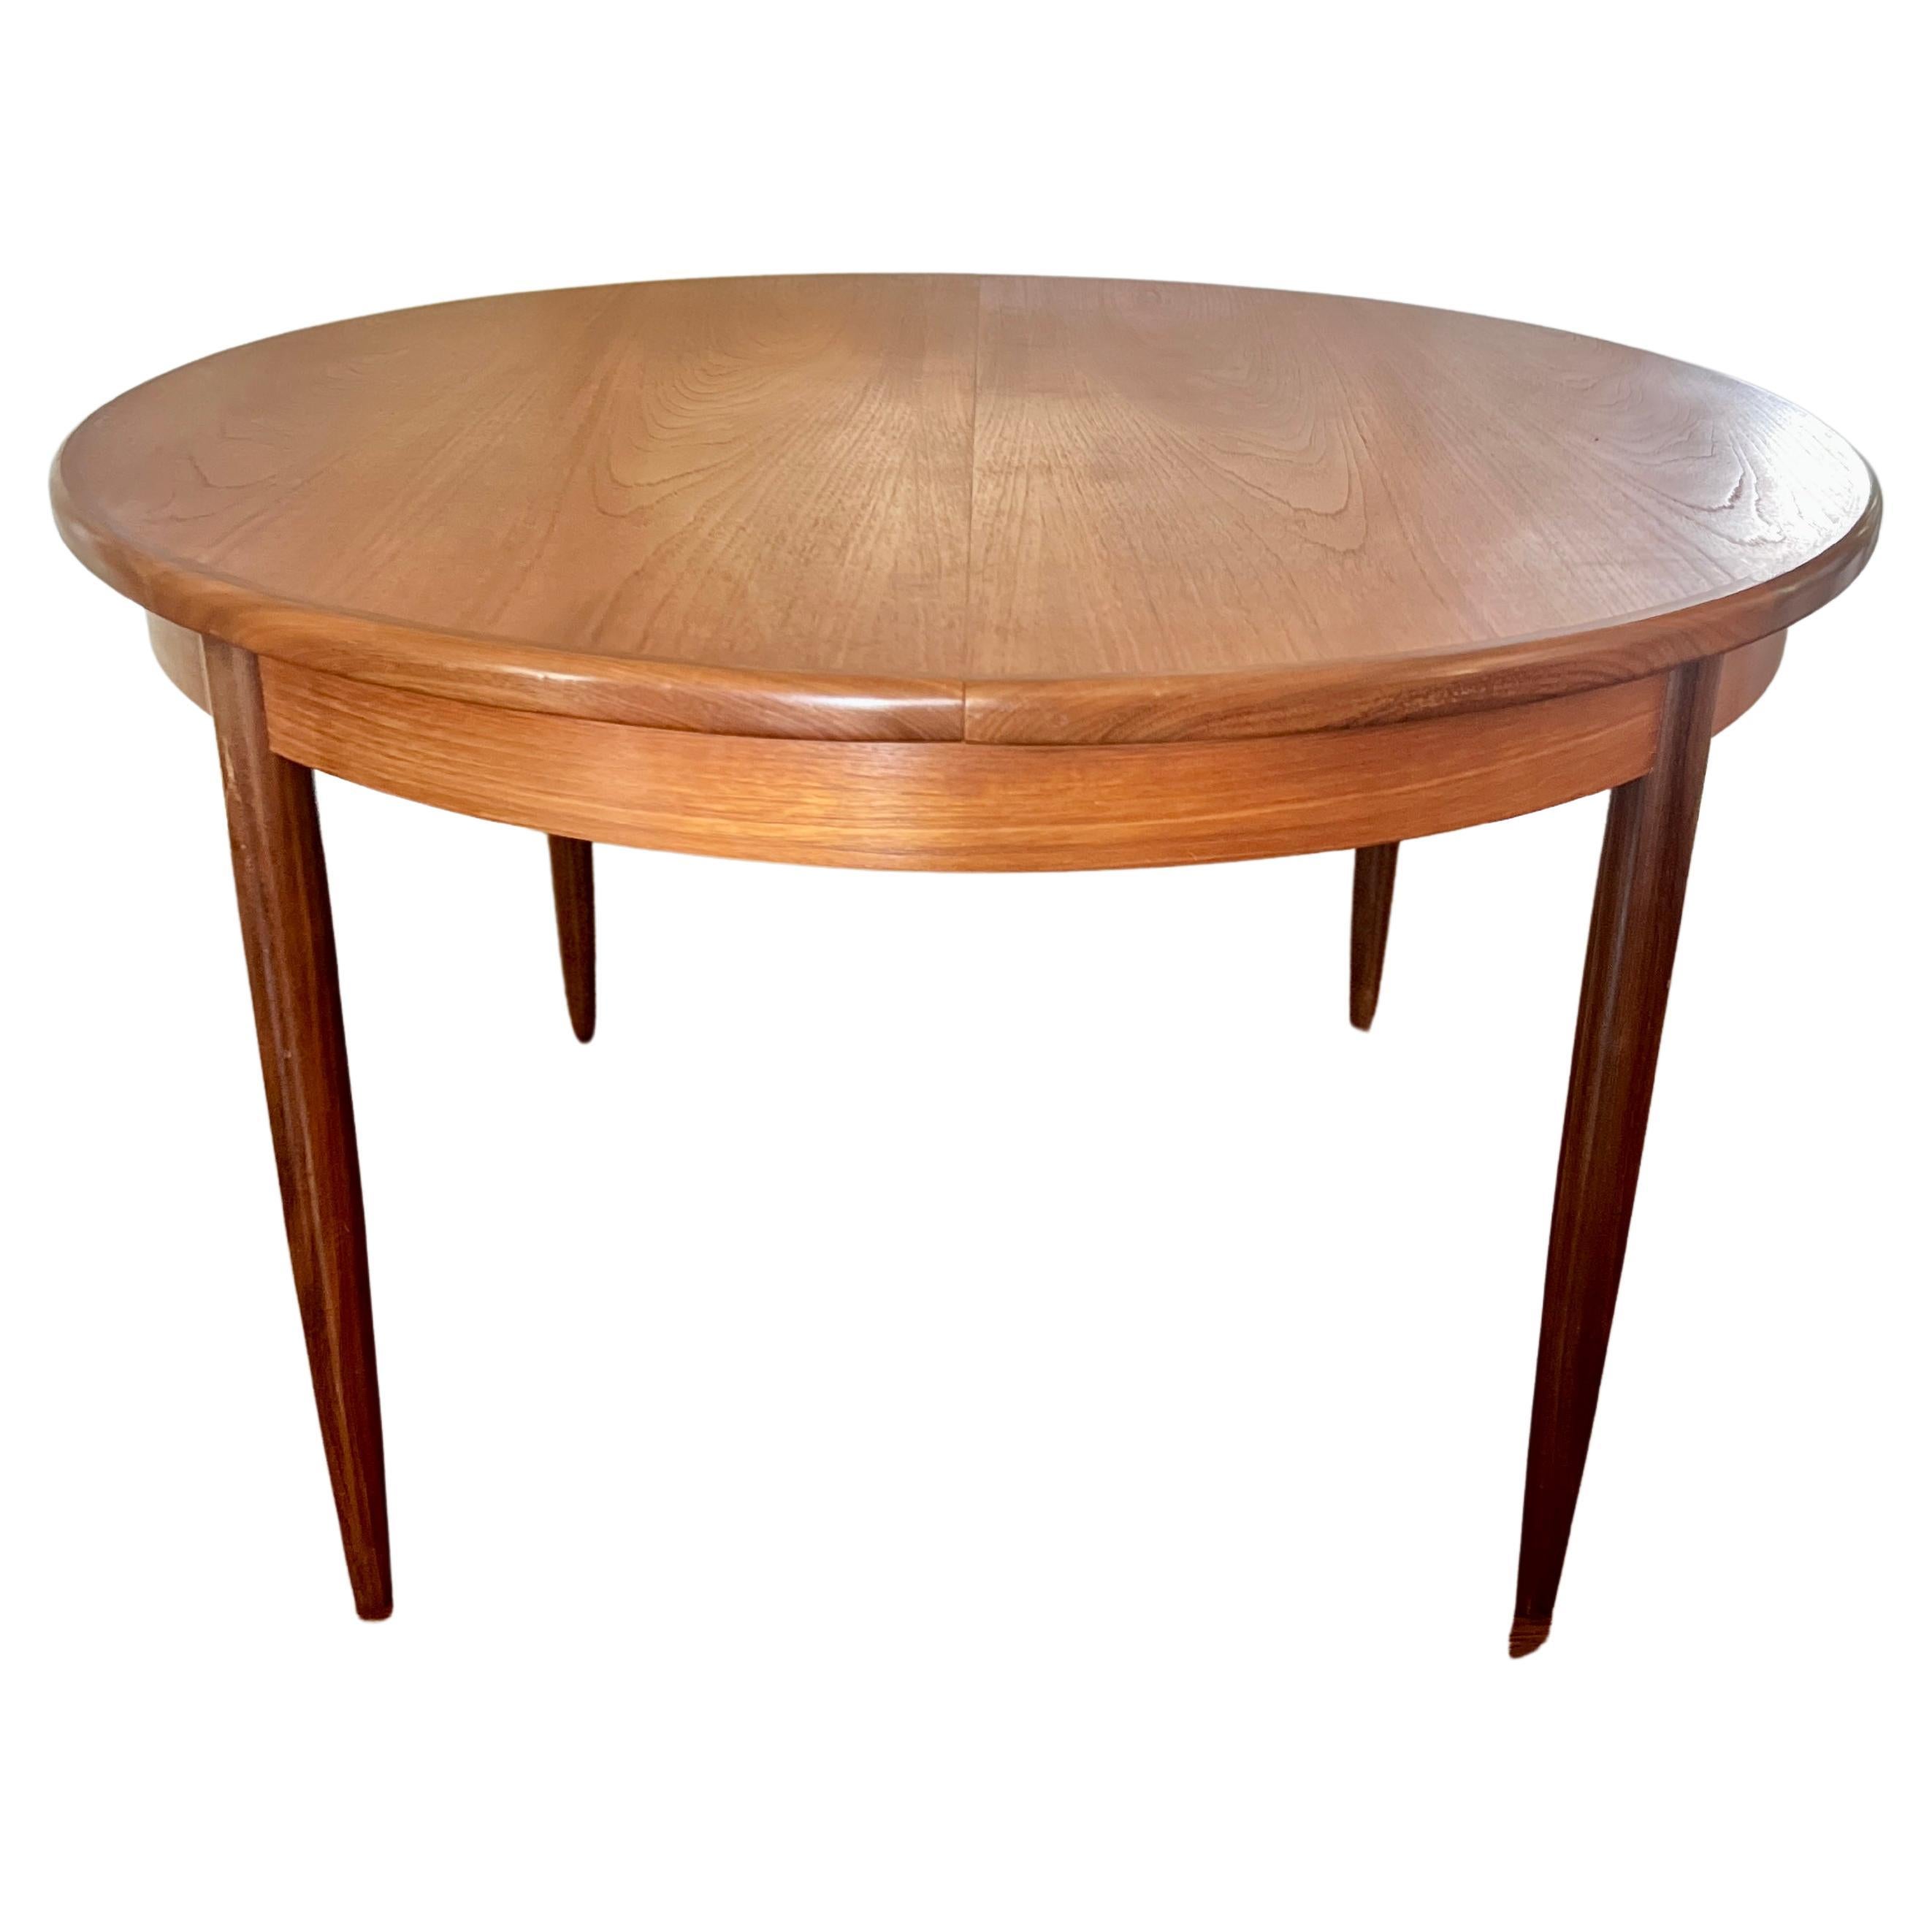 A MCM round teak dining table by G plan, with one 18" pop up leaf 